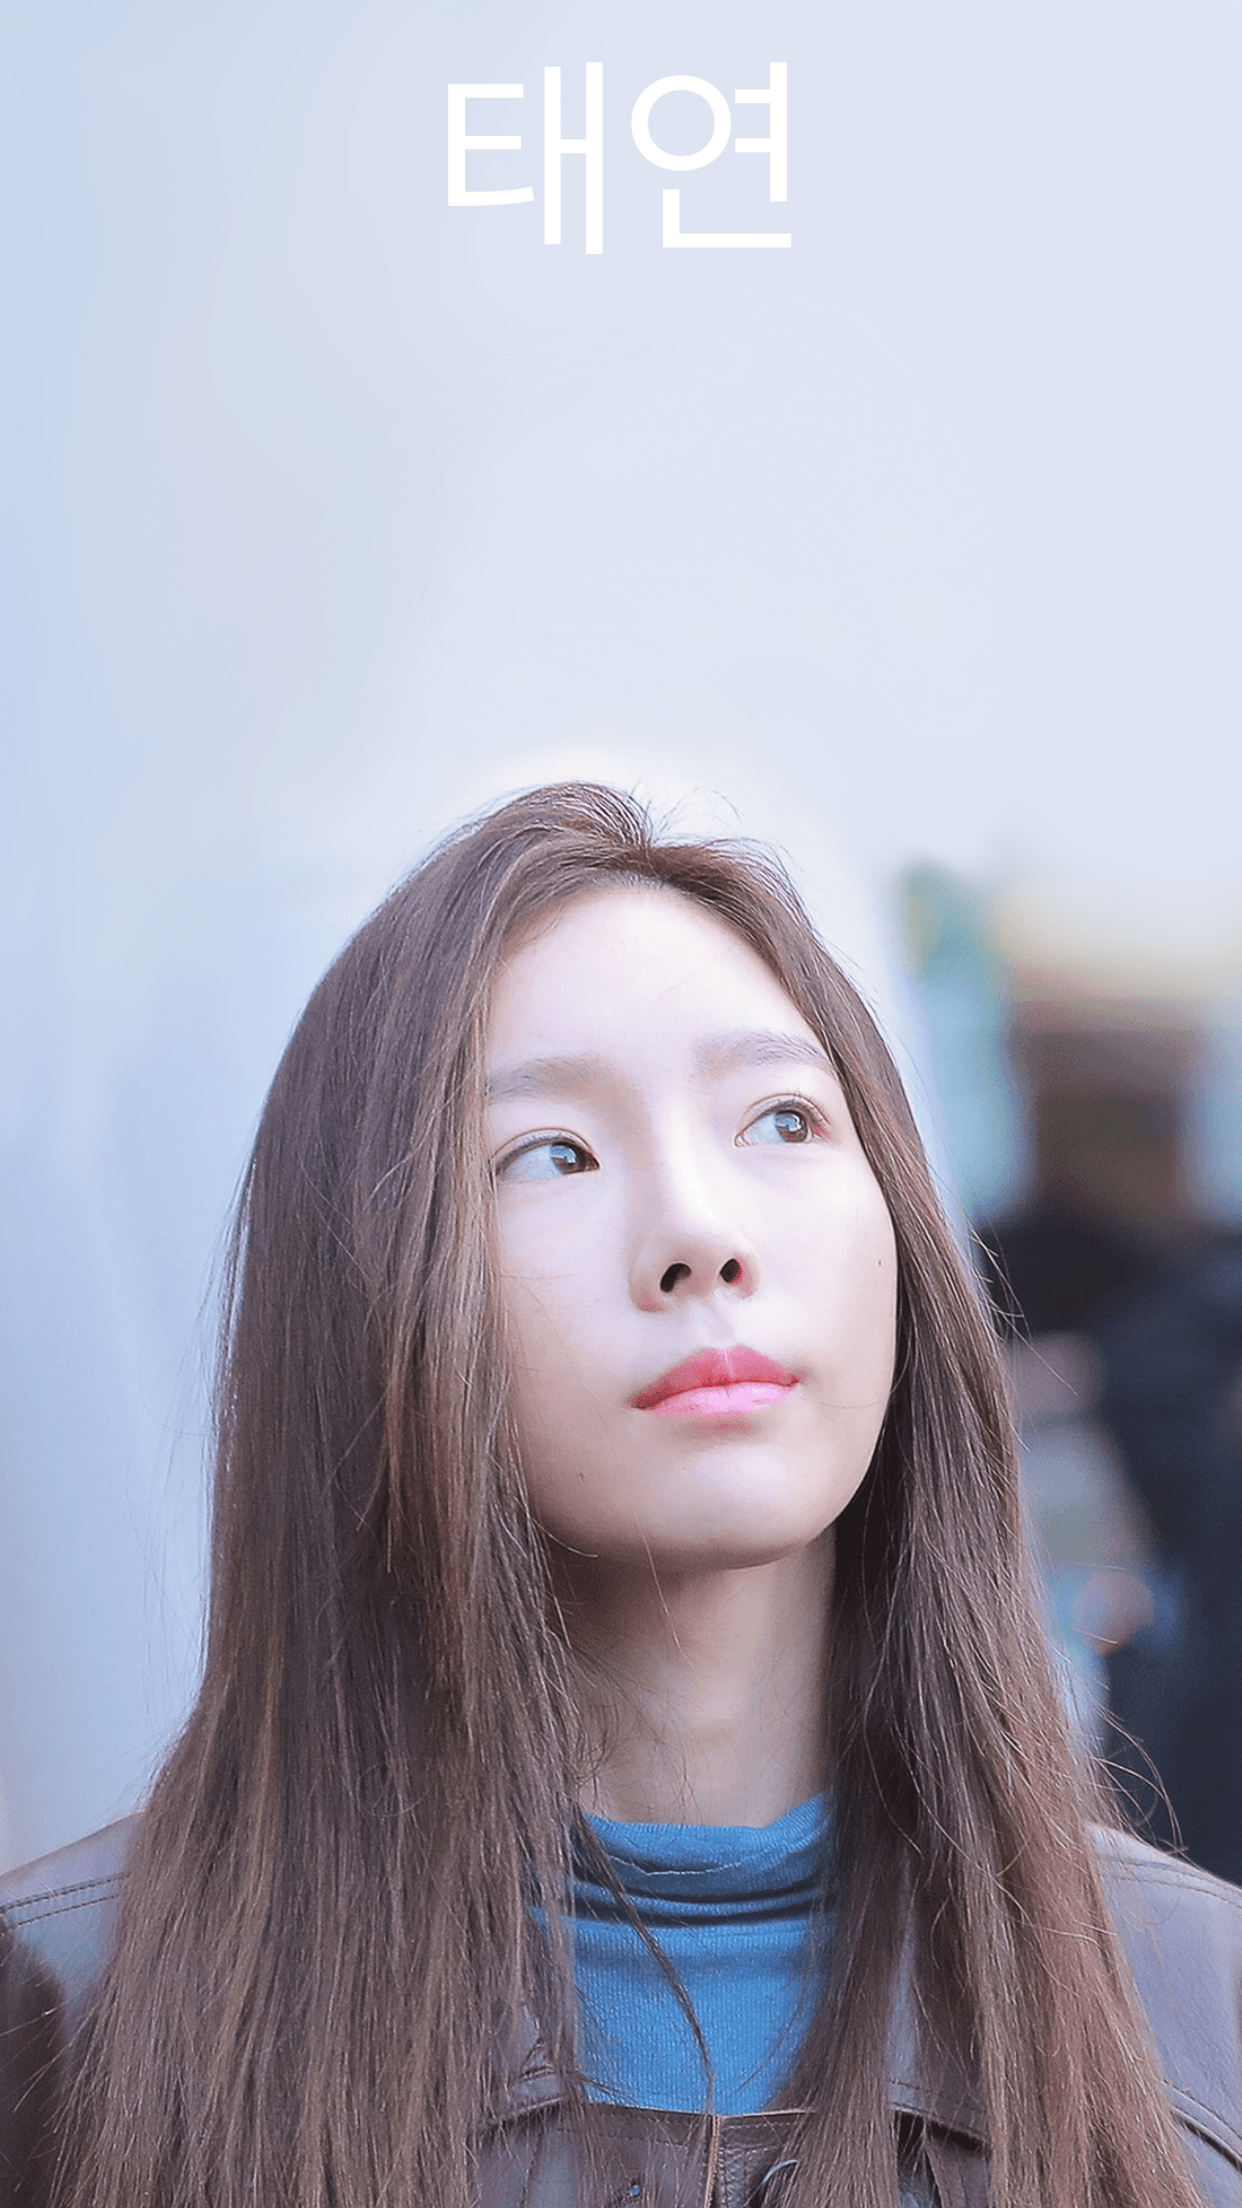 Taeyeon Phone Wallpapers Wallpaper Cave Images, Photos, Reviews